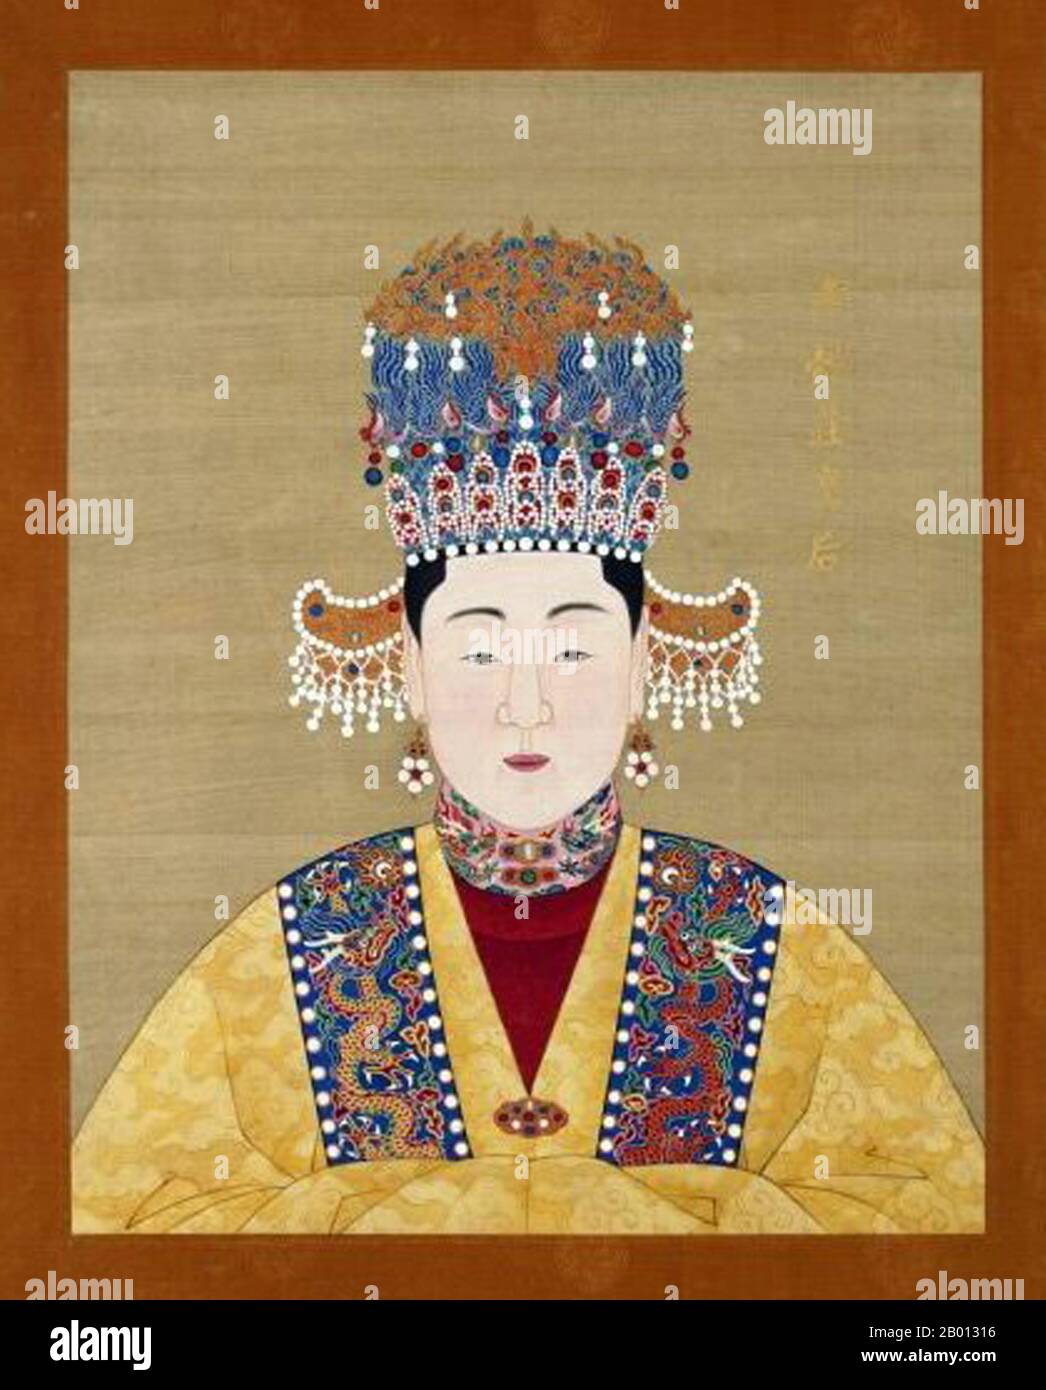 China: Empress Xiao Yi Zhuang (-1558), consort of the 13th Ming Emperor Longqing (r. 1567-1572). Hanging scroll painting, 16th-17th century.  Empress Xiaoyizhuang was the first consort of the Longqing Emperor of the Ming Dynasty. She married the emperor in 1553 and bore him three children but died in 1558. Stock Photo